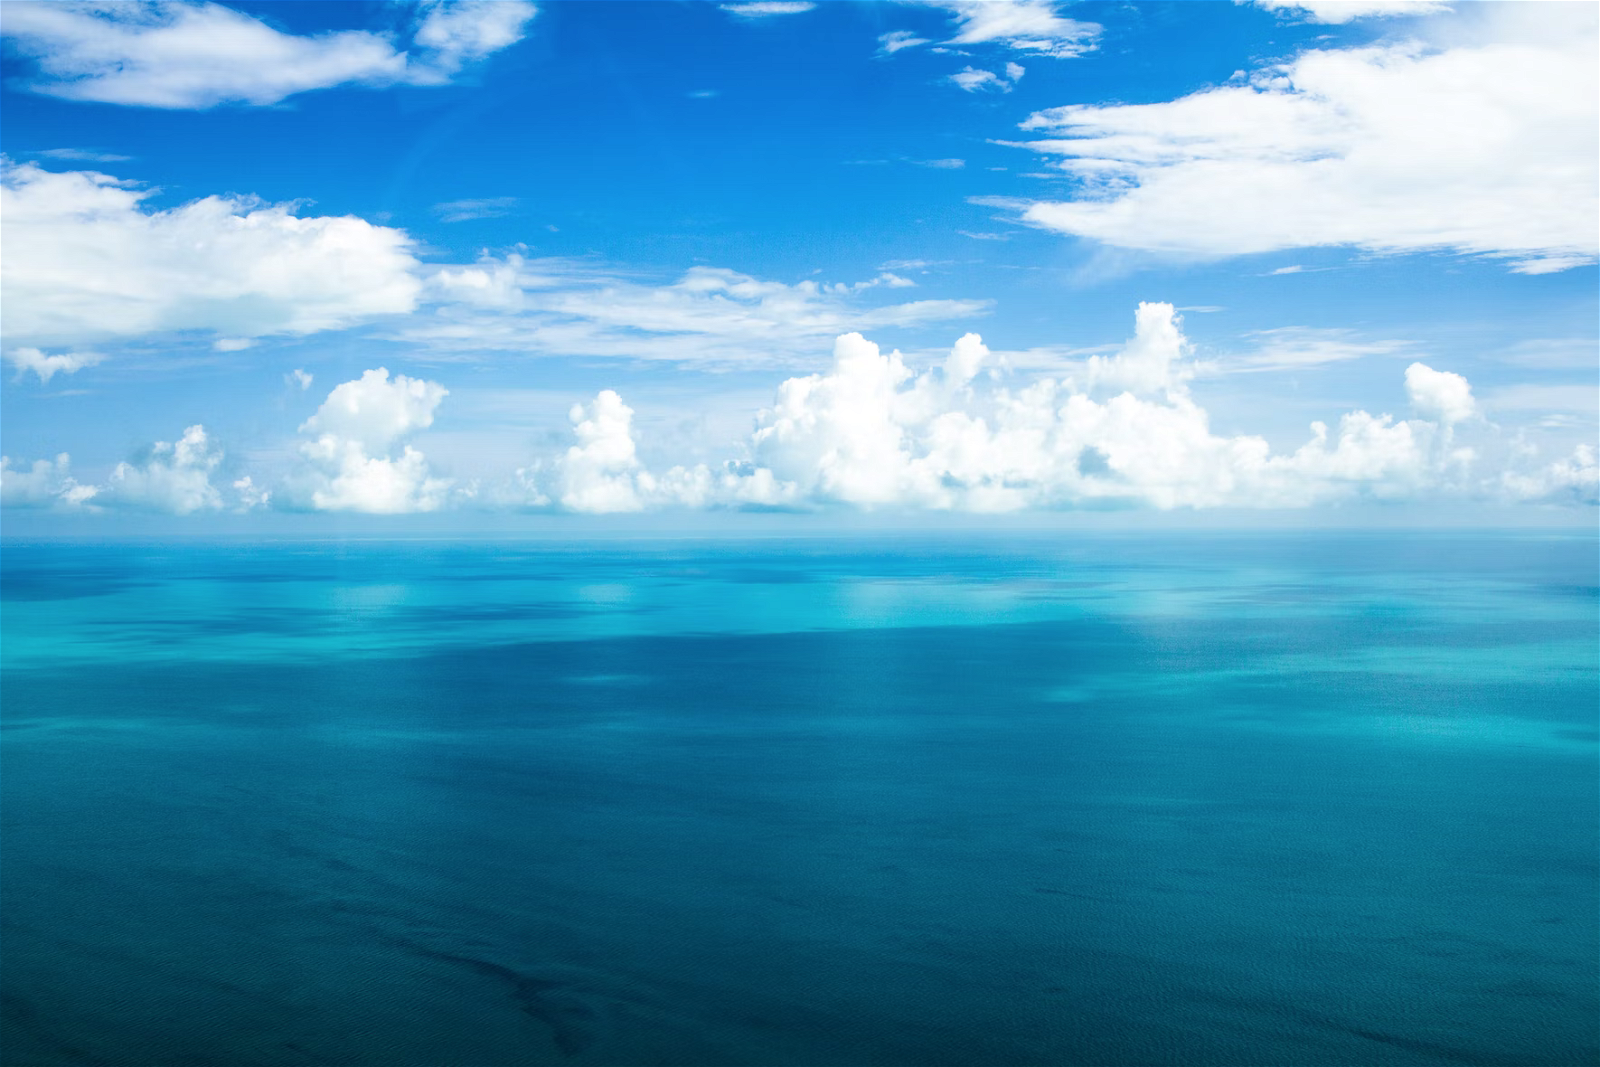 There’s less dust at sea, so it’s harder for clouds to first form